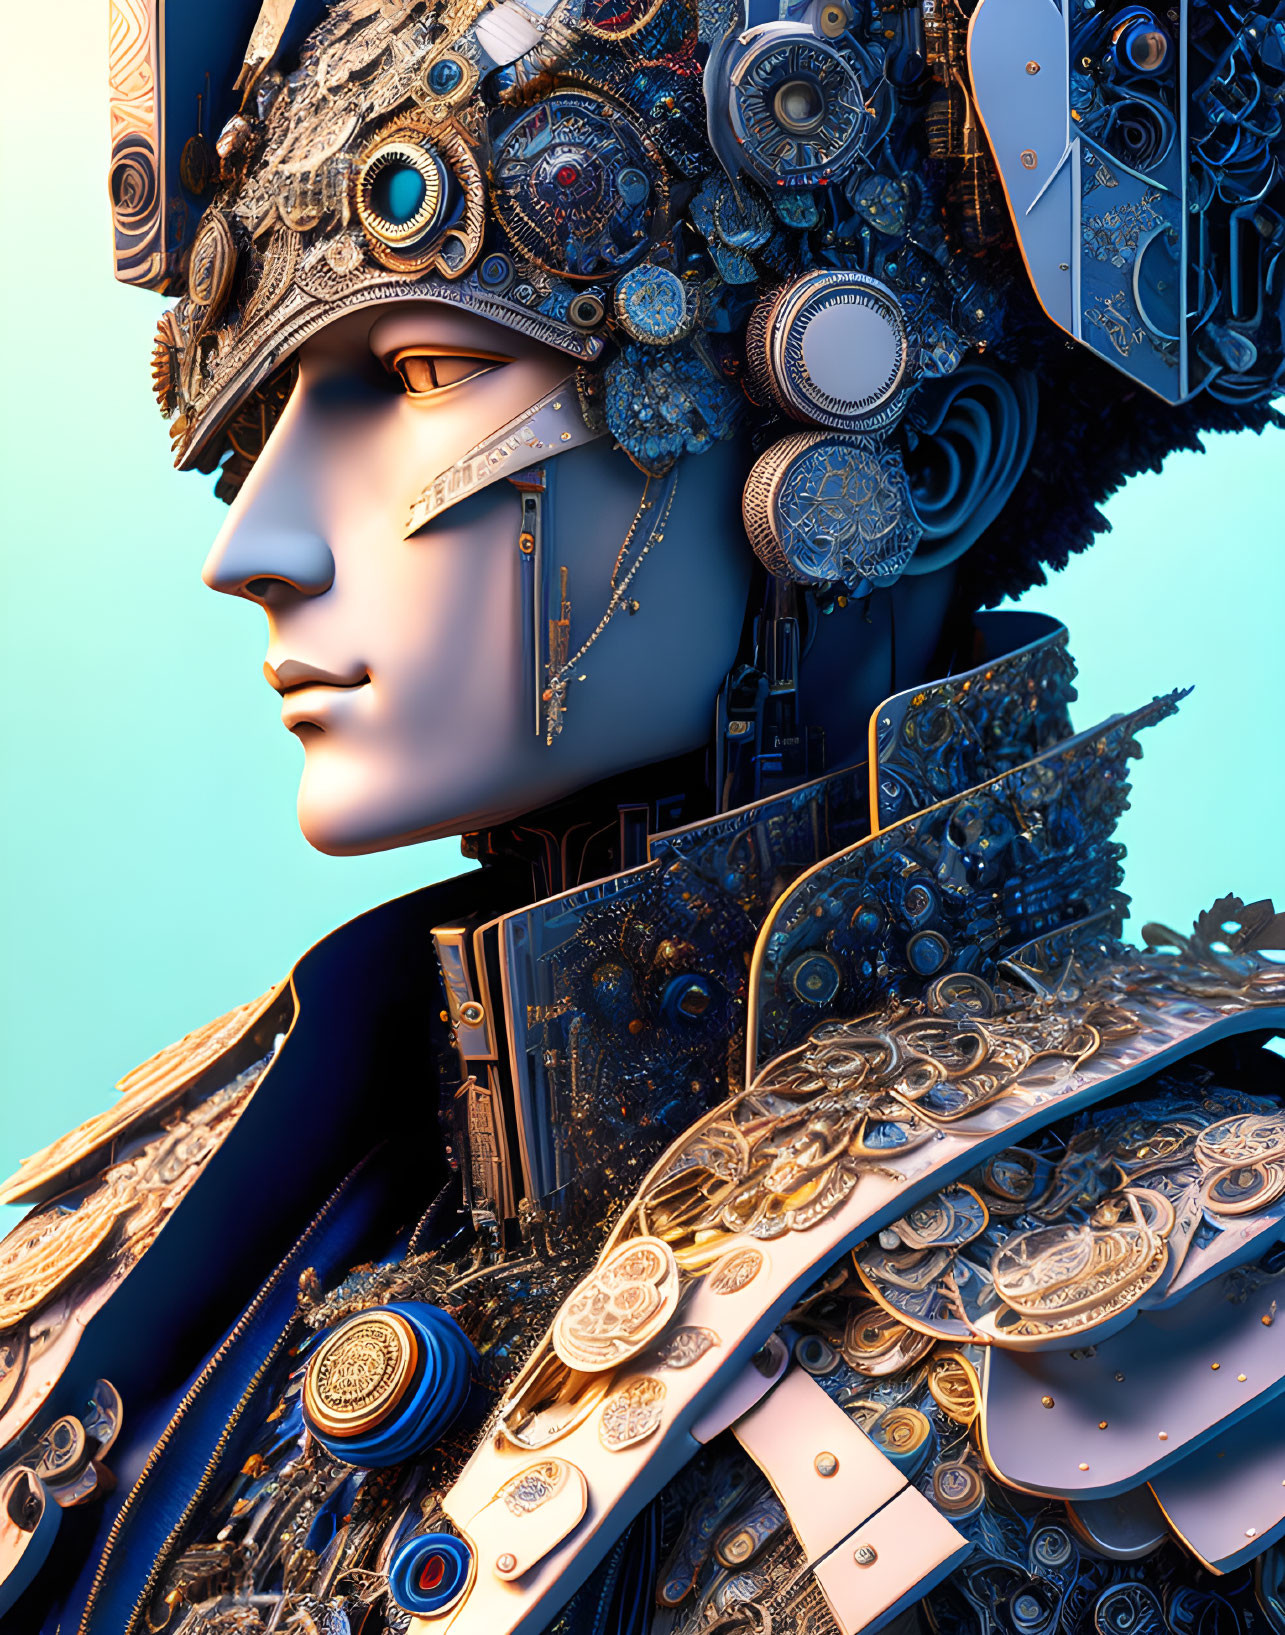 Detailed digital artwork of robotic figure with mechanical headpiece in cool blue tones